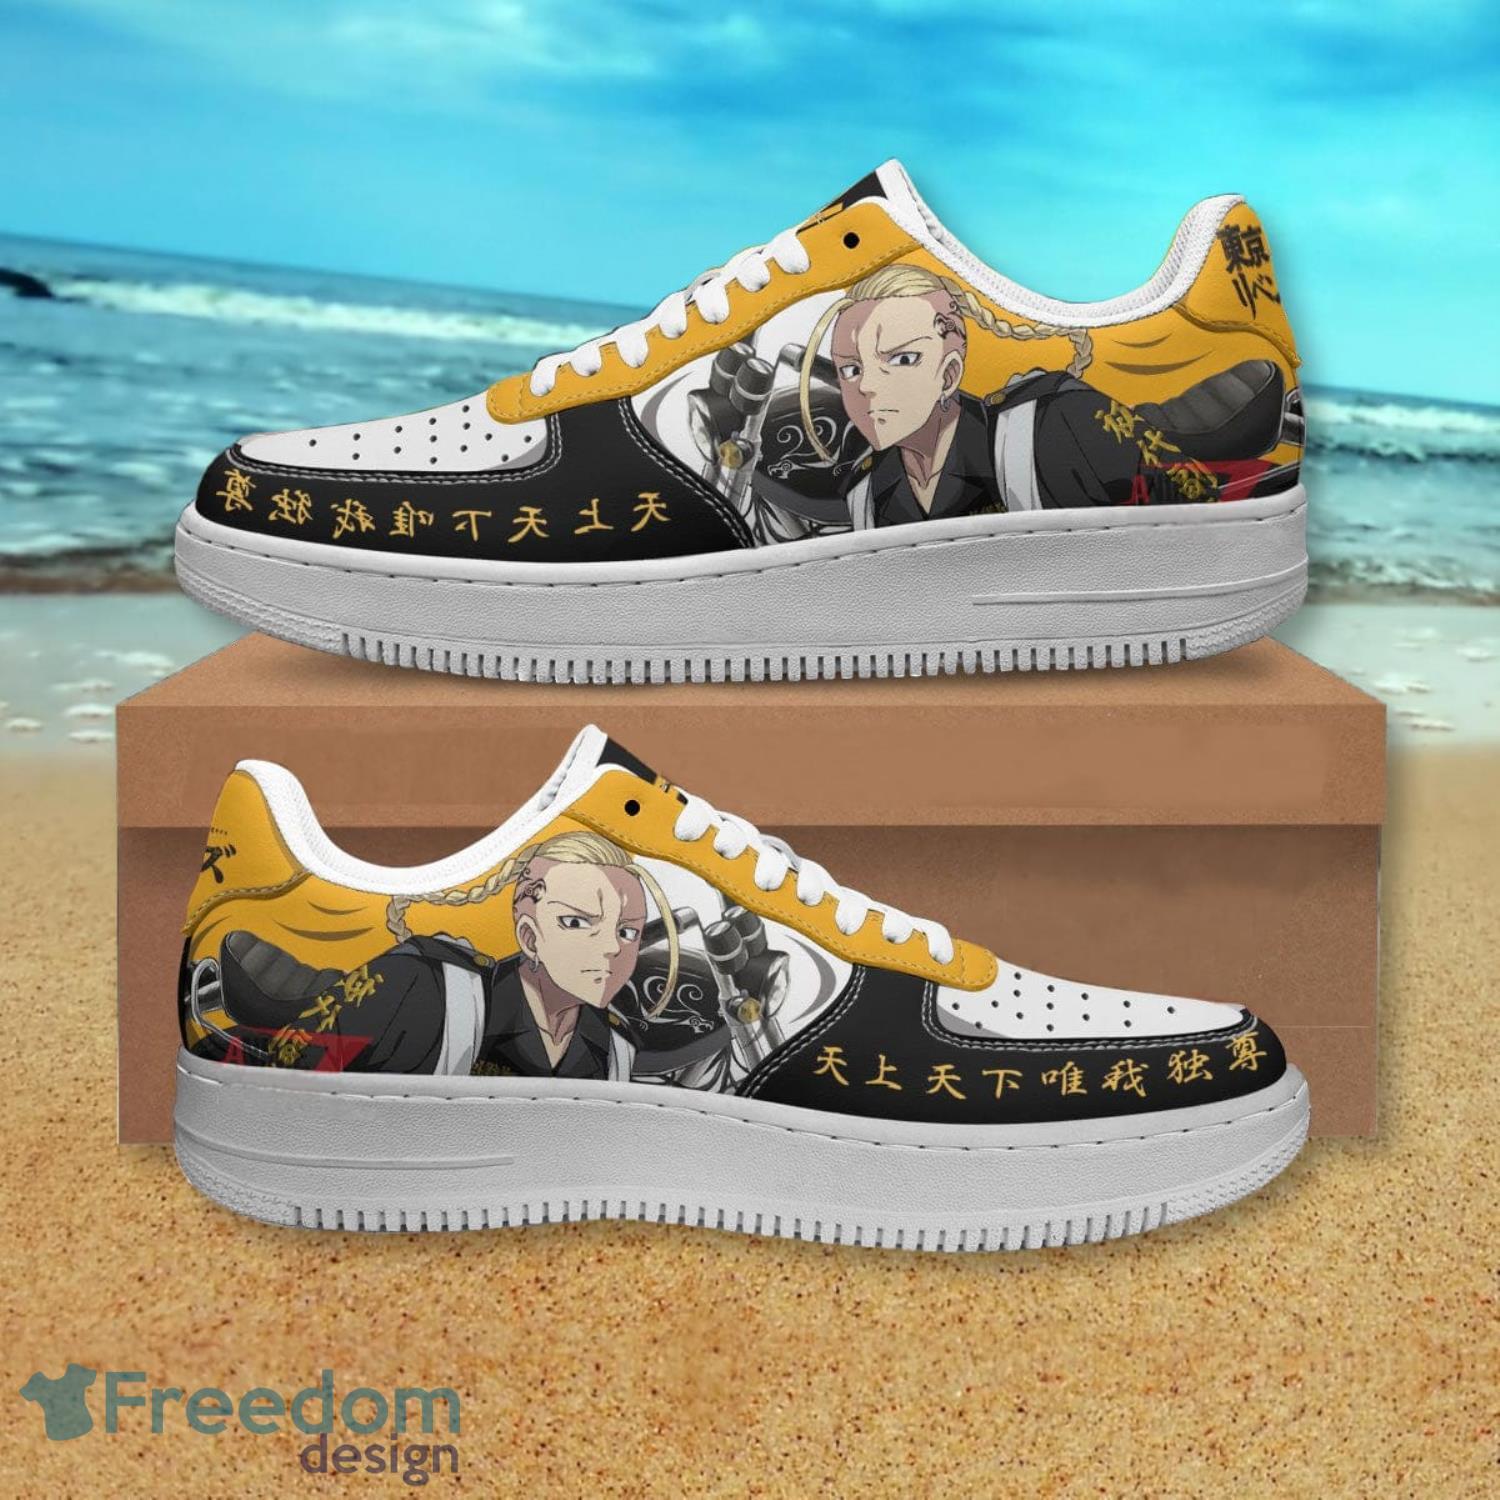 Tokyo Revengers Draken Air Force Shoes Gift For Anime's Fans Product Photo 1